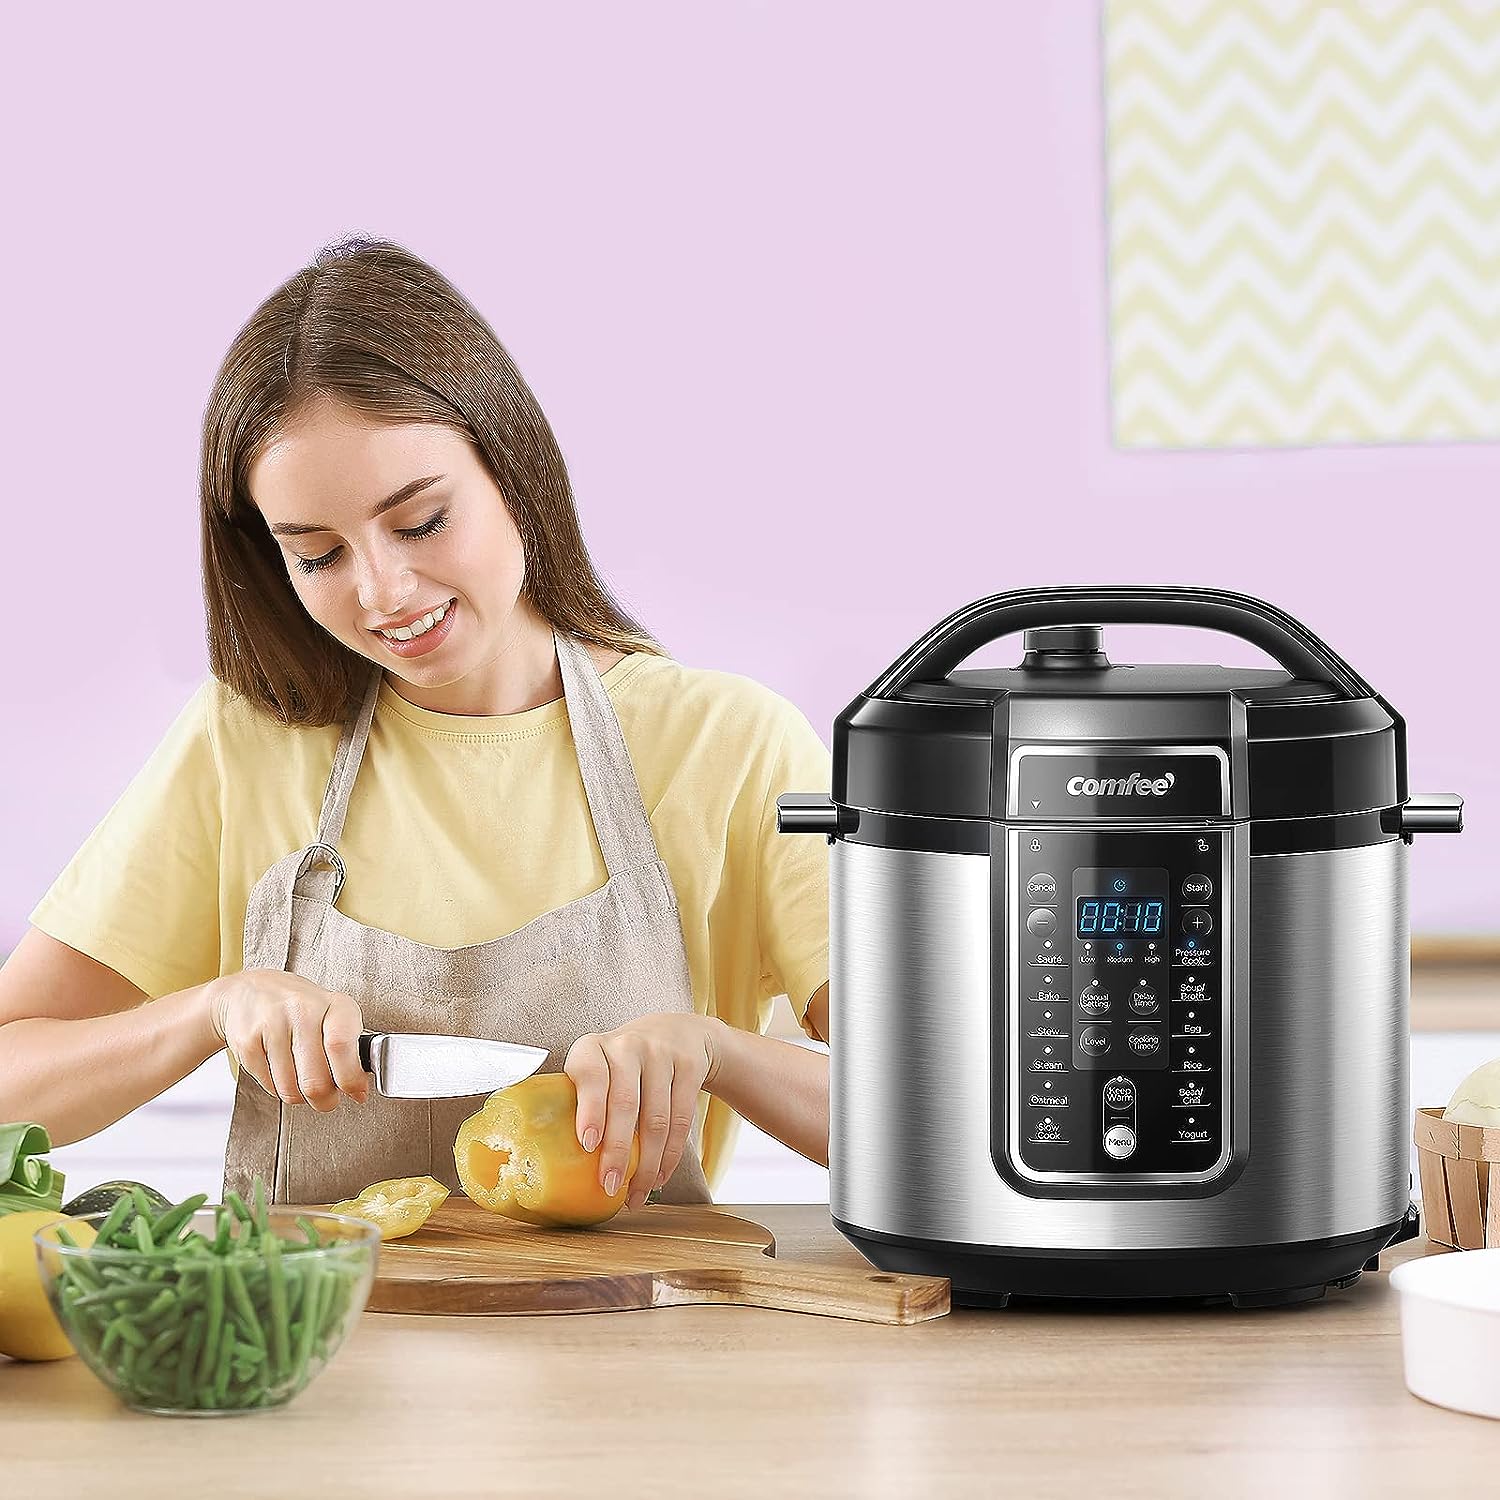 https://bigbigmart.com/wp-content/uploads/2023/08/COMFEE-Pressure-Cooker-6-Quart-with-12-Presets-Multi-Functional-Programmable-Slow-Cooker-Rice-Cooker-Steamer-Saute-pan-Egg-Cooker-Warmer-and-More7.jpg